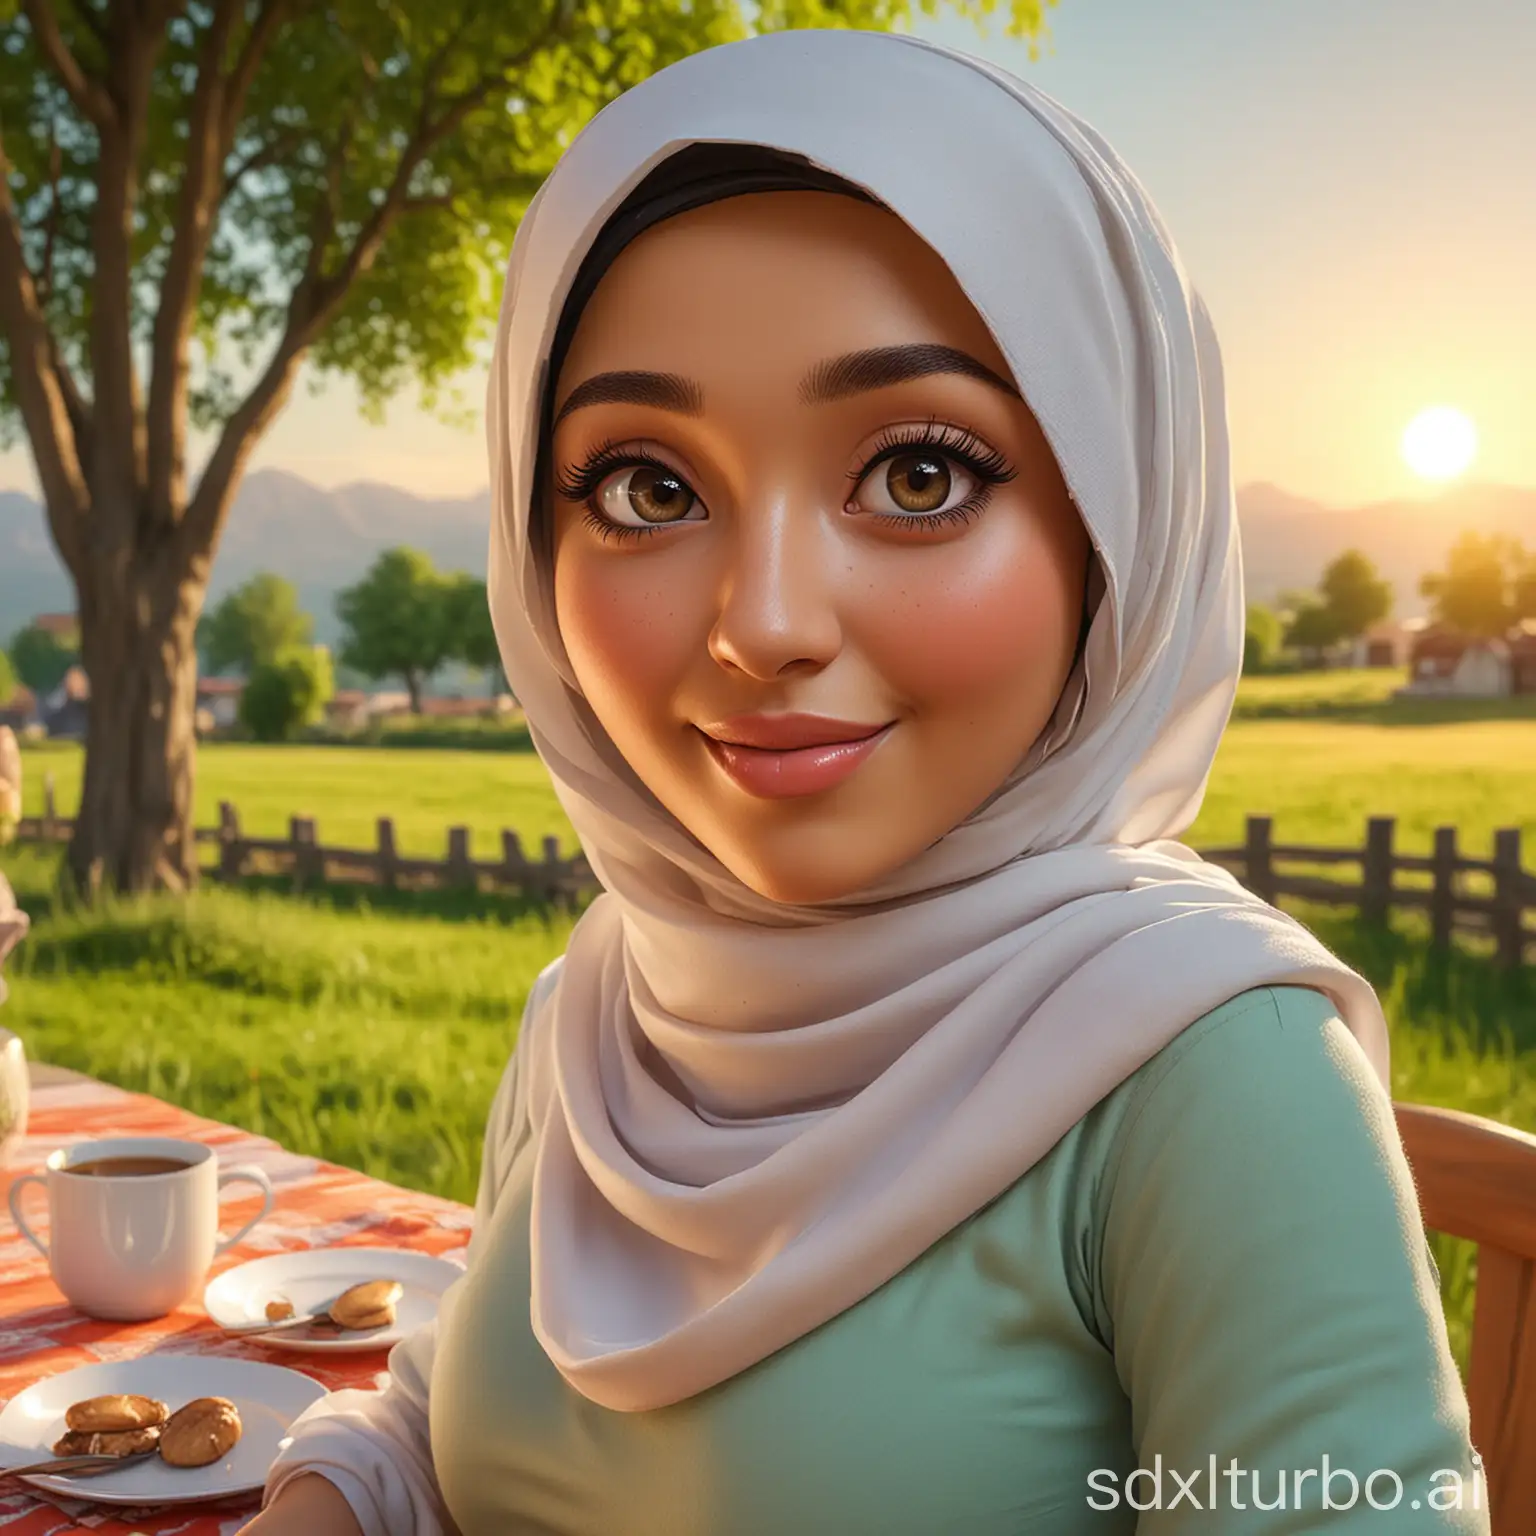 Artistic-3D-Caricature-of-a-Beautiful-Woman-with-Hijab-at-Sunset